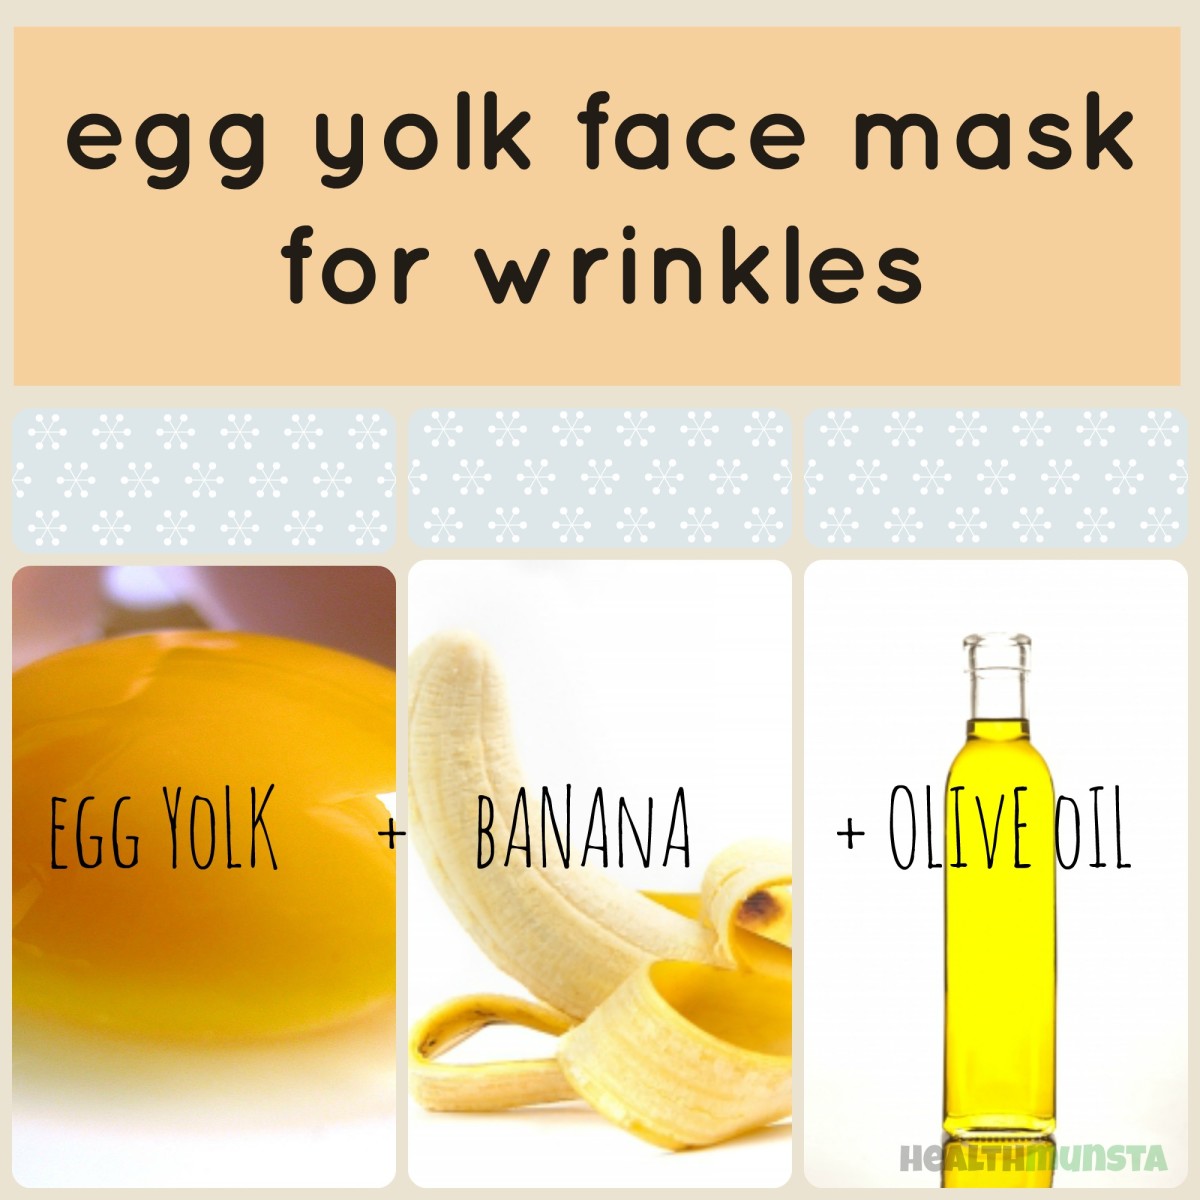 Top 3 Diy Egg Yolk Face Mask Recipes For Glowing Skin Bellatory Fashion And Beauty Some people also state that egg whites contain vitamins and minerals that can benefit the skin's overall appearance. top 3 diy egg yolk face mask recipes